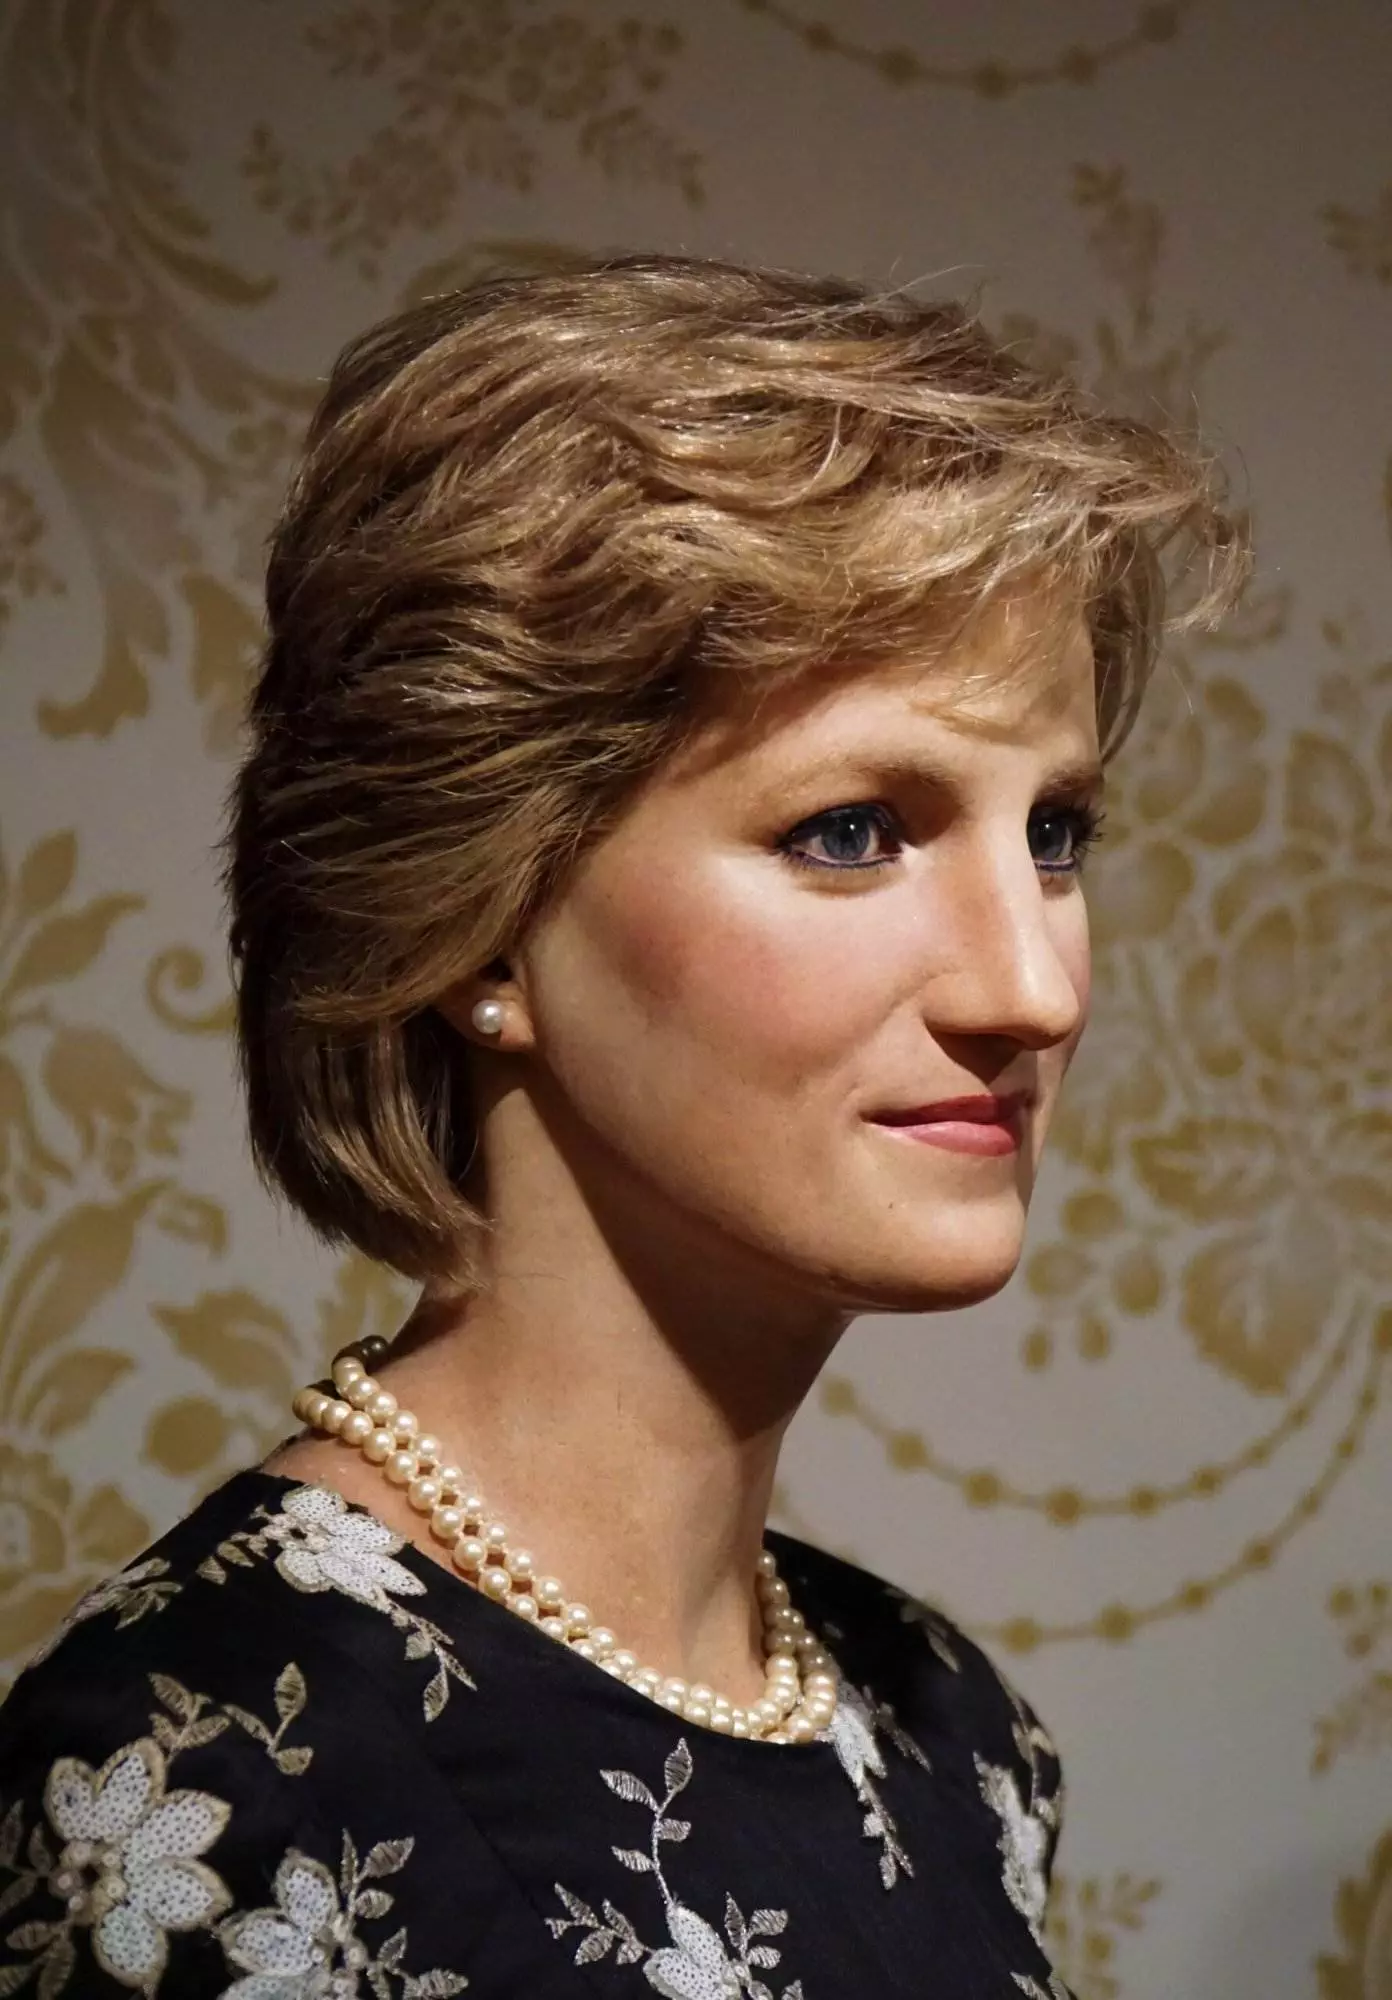 The Unexplained Death of Princess Diana